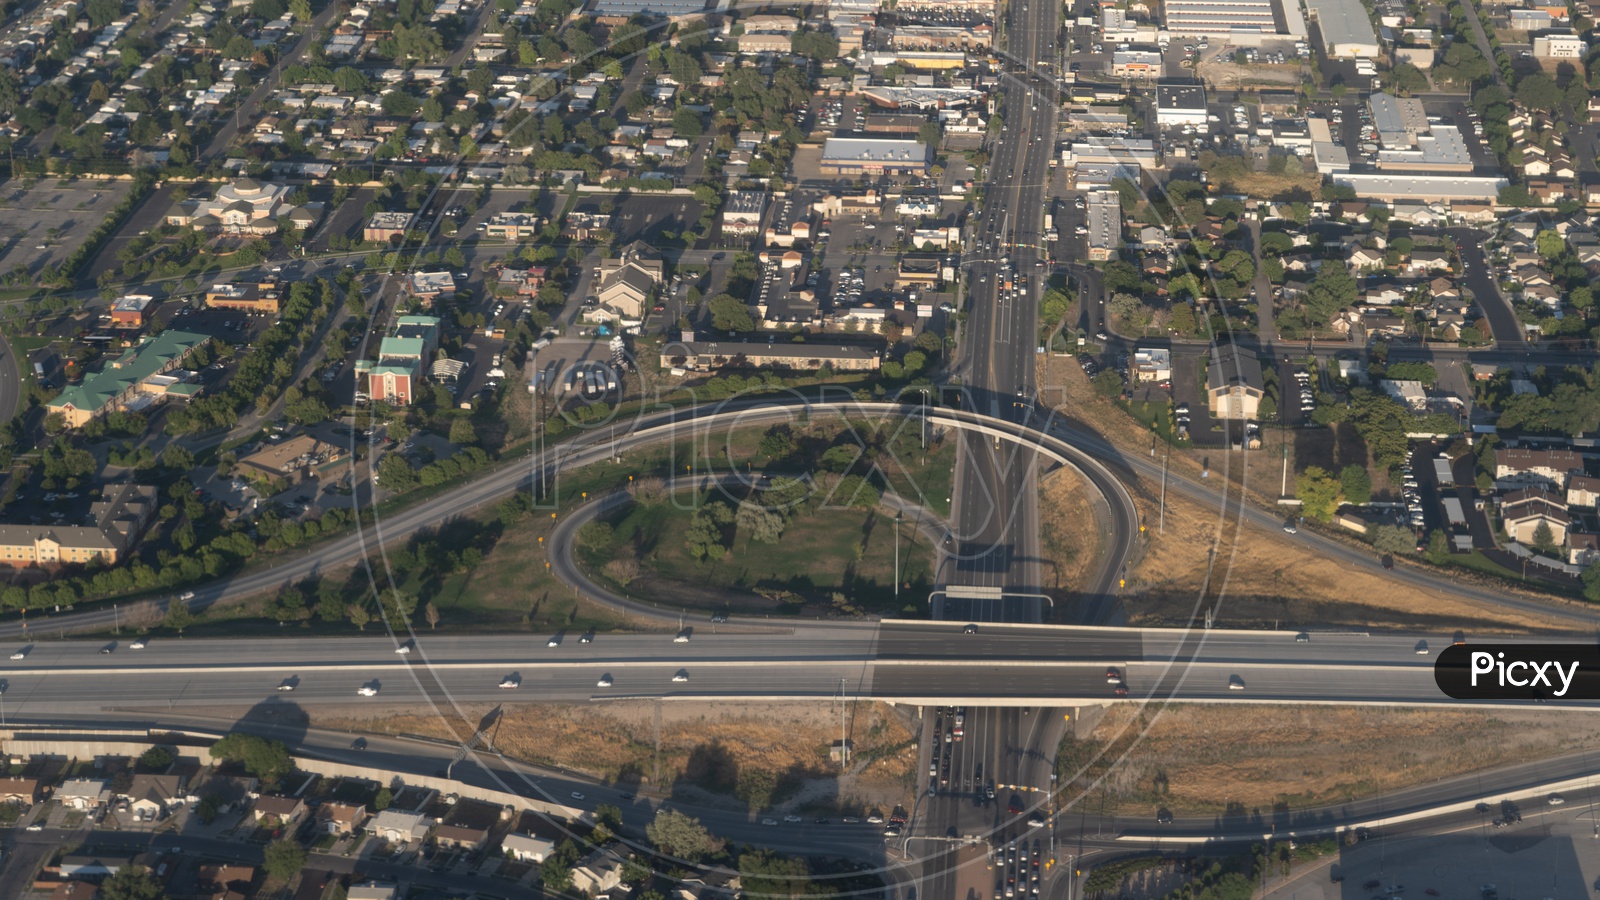 Birdseye view of the Urban Utah Road lines Intersection